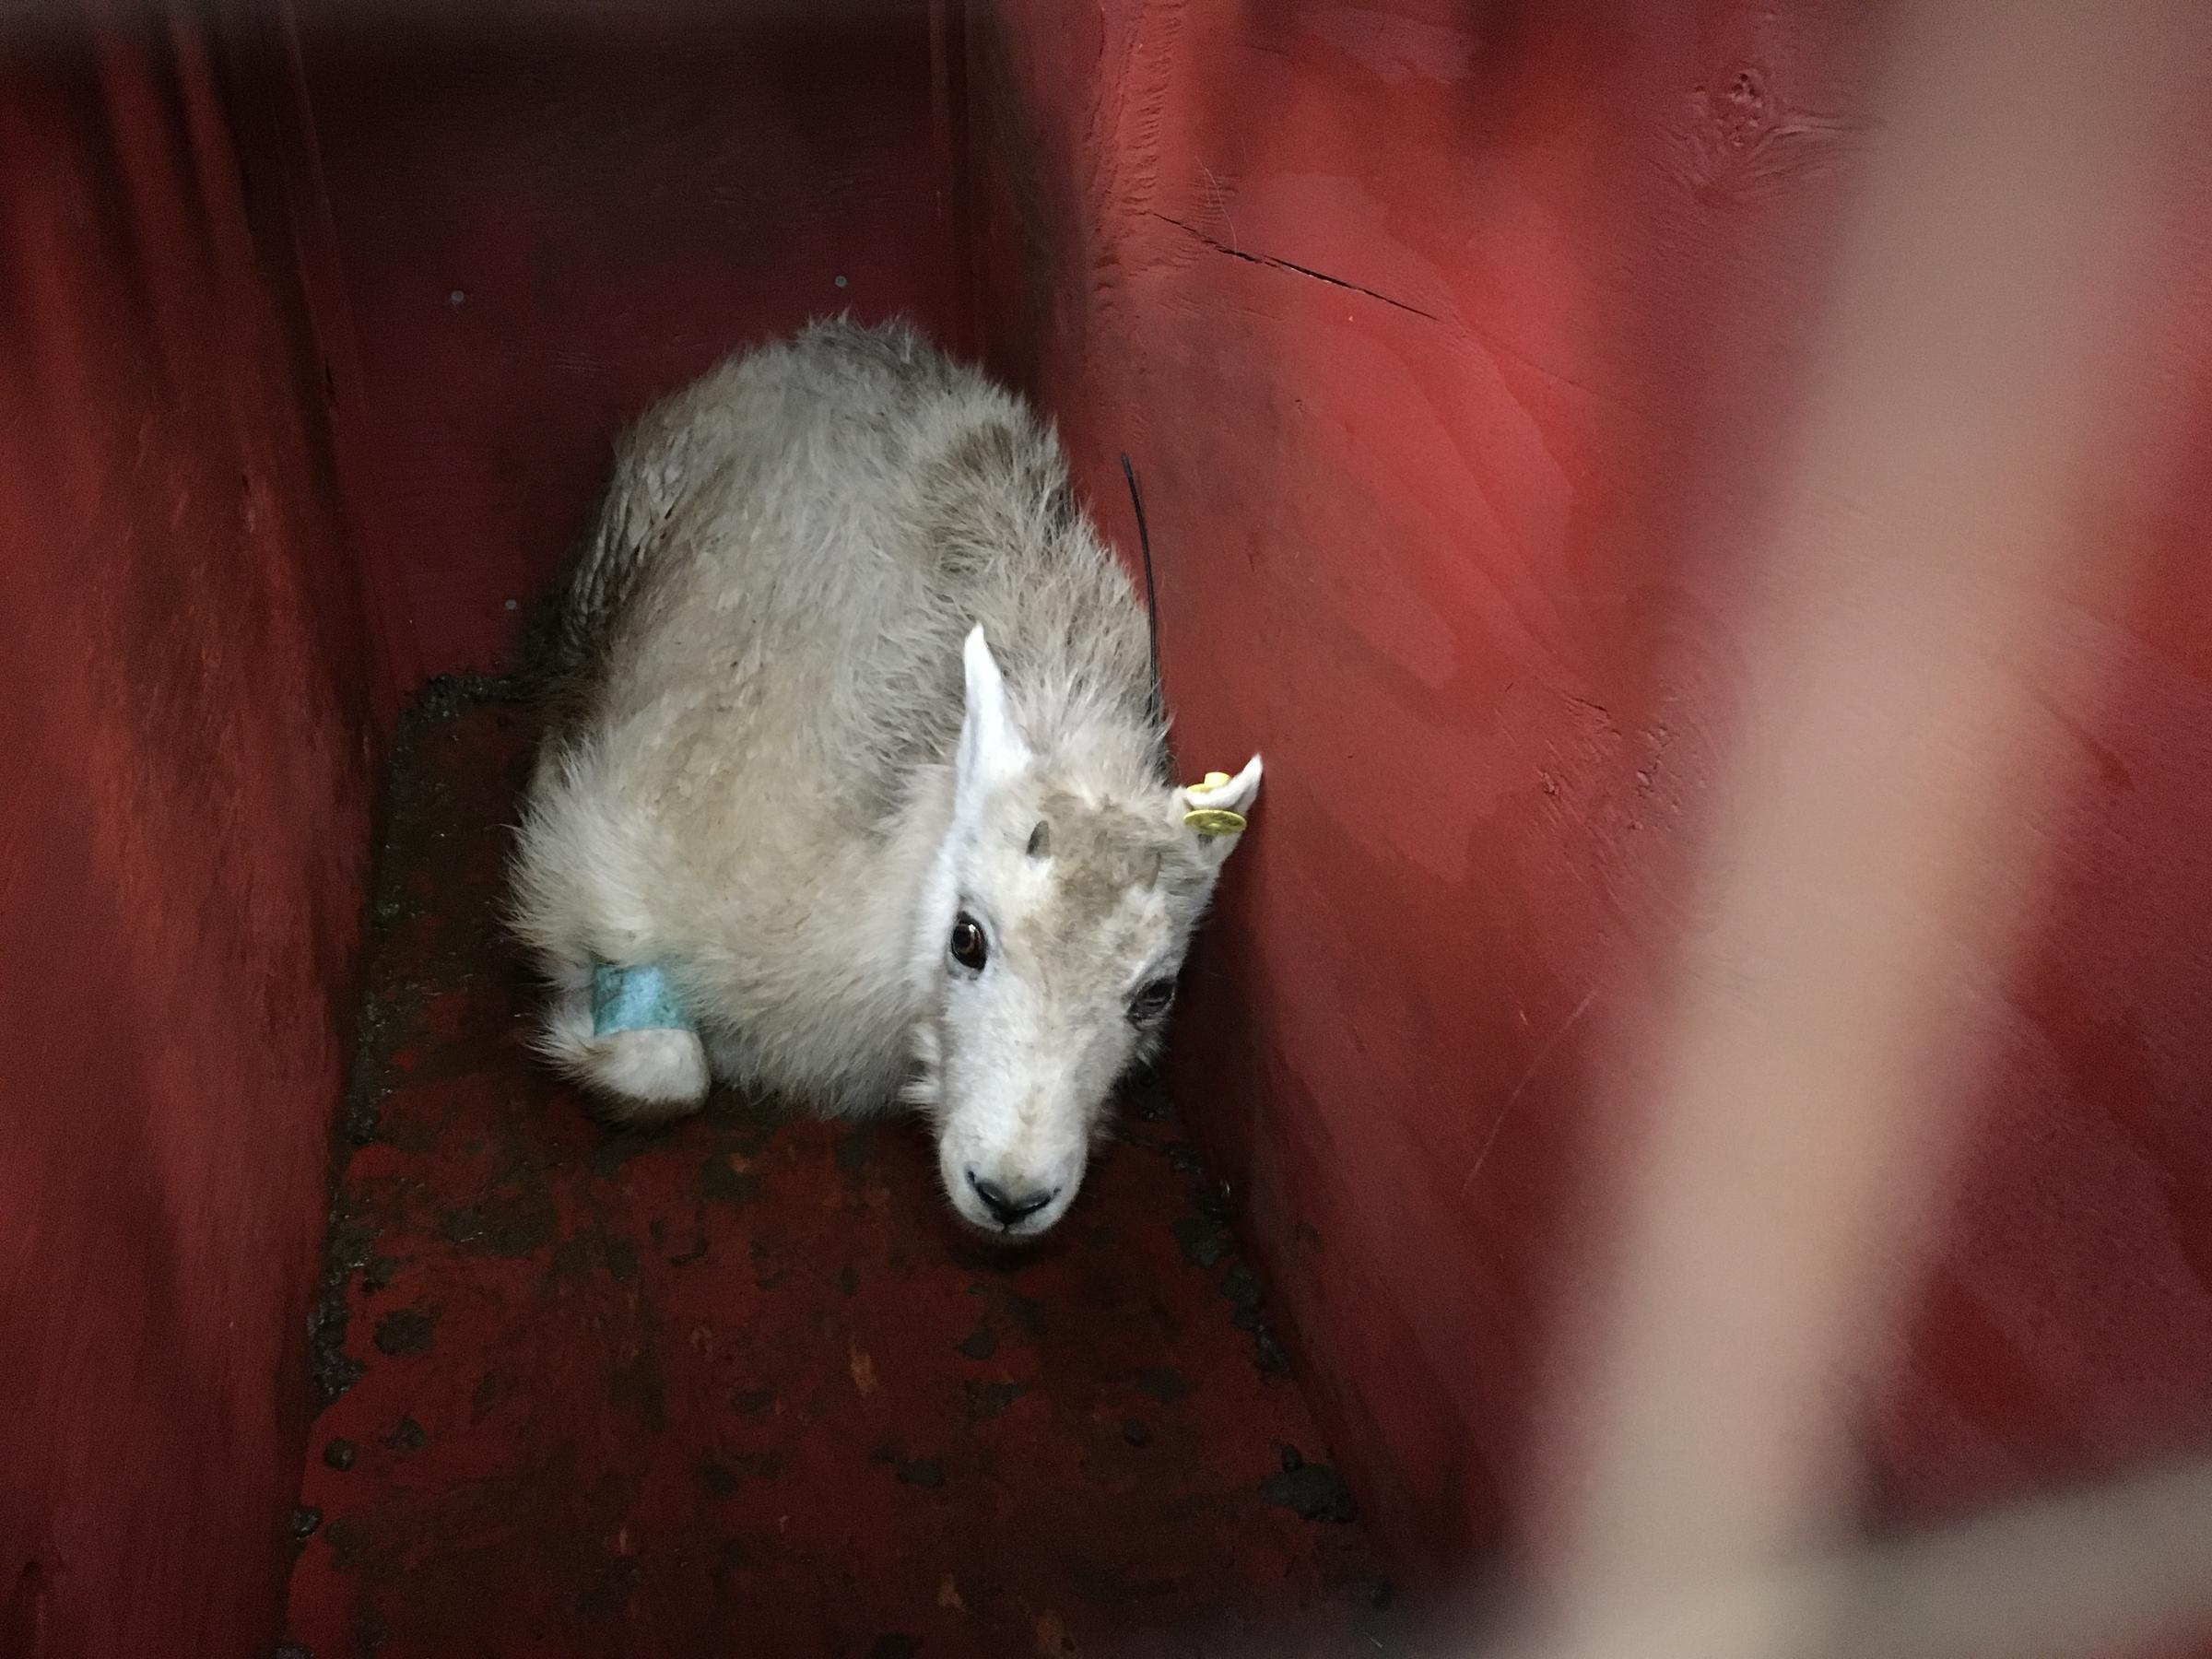 A young male mountain goat rested in its crate shortly before release Wednesday. CREDIT: TOM BANSE / NW NEWS NETWORK